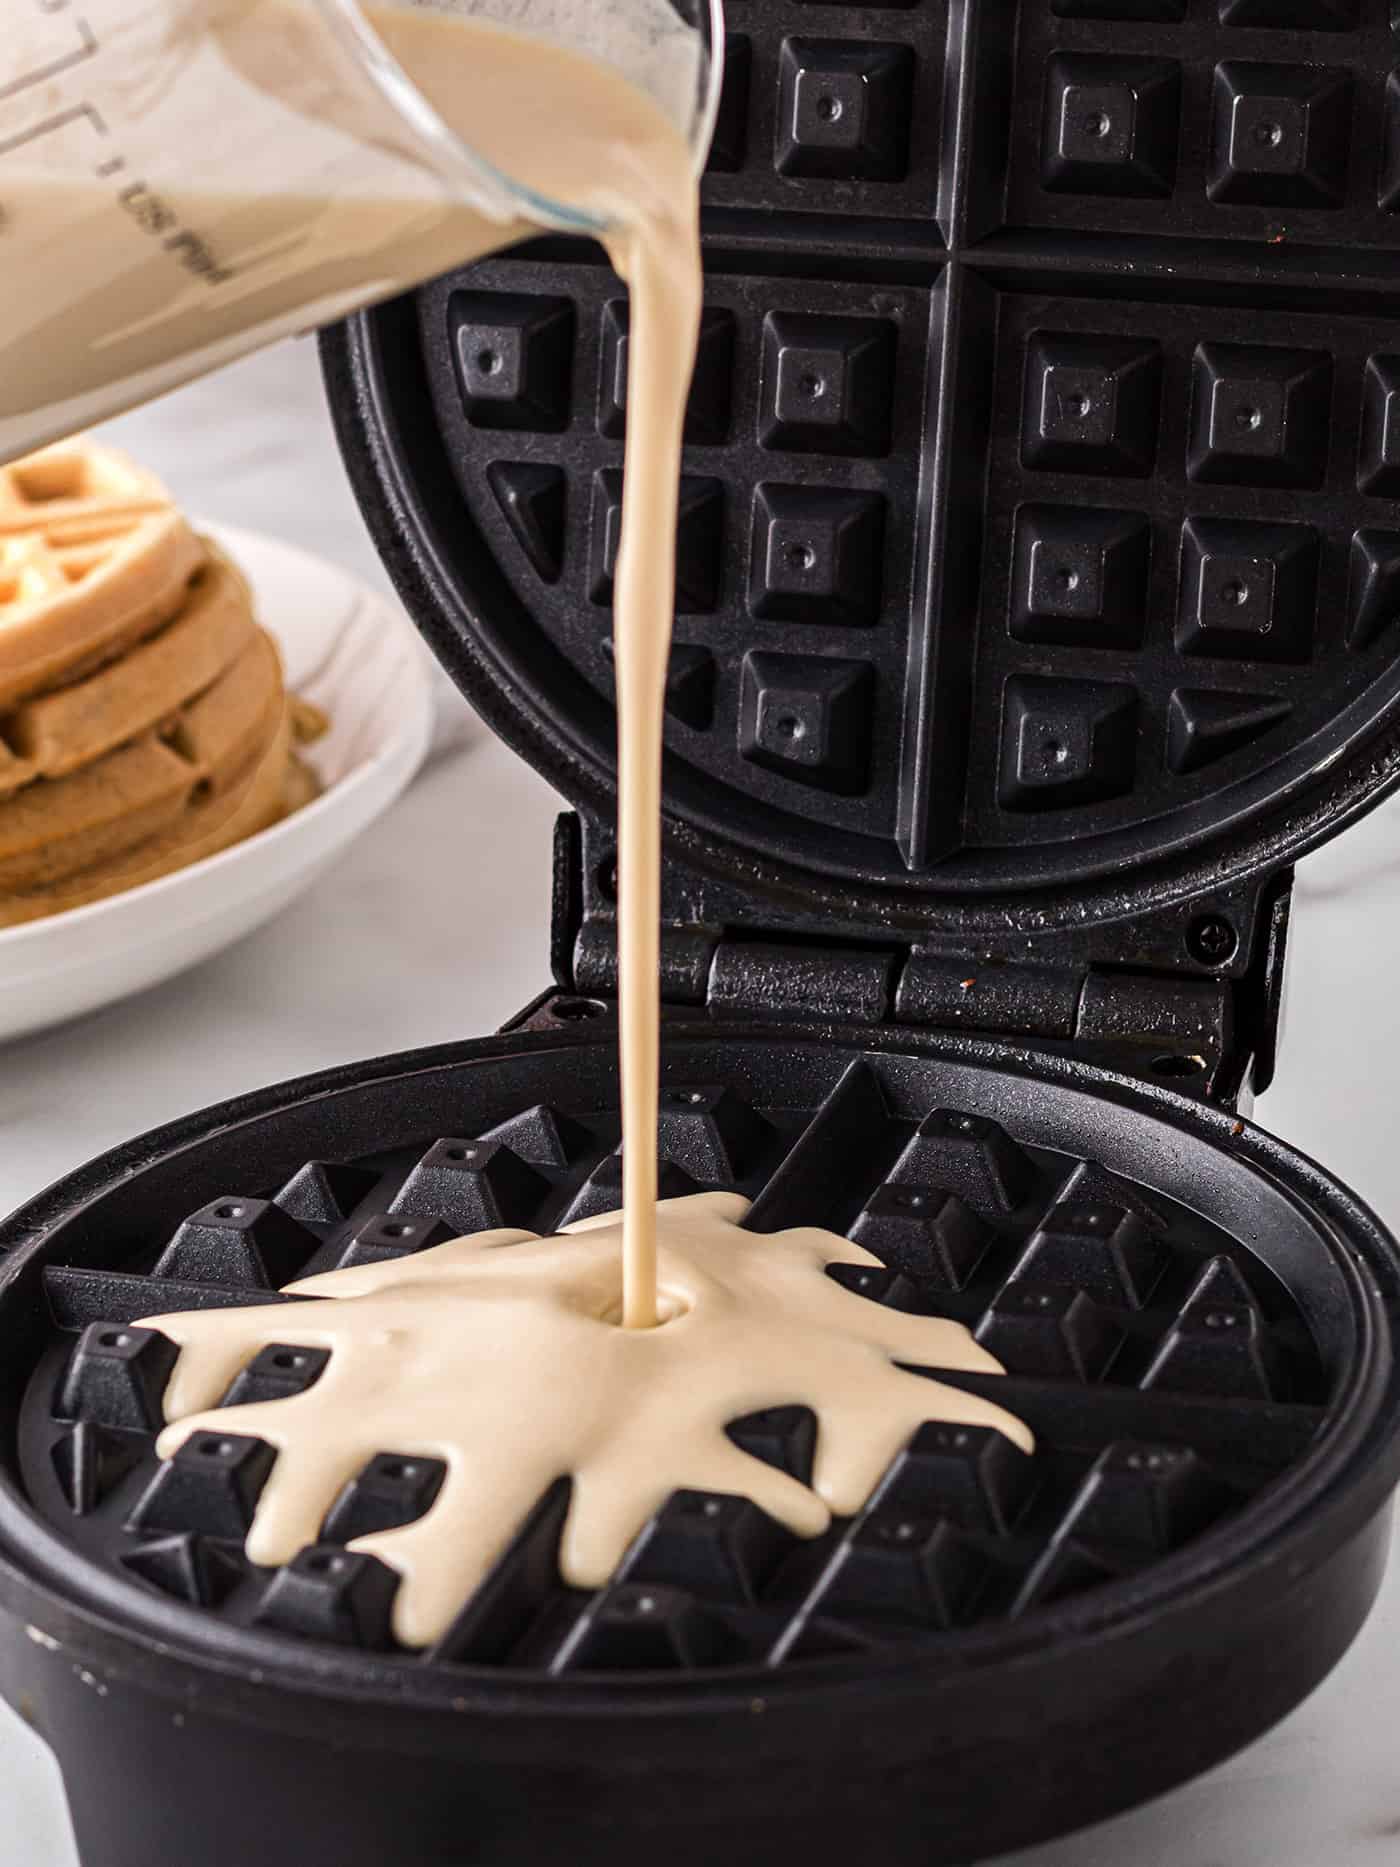 Batter being poured nto a waffle maker